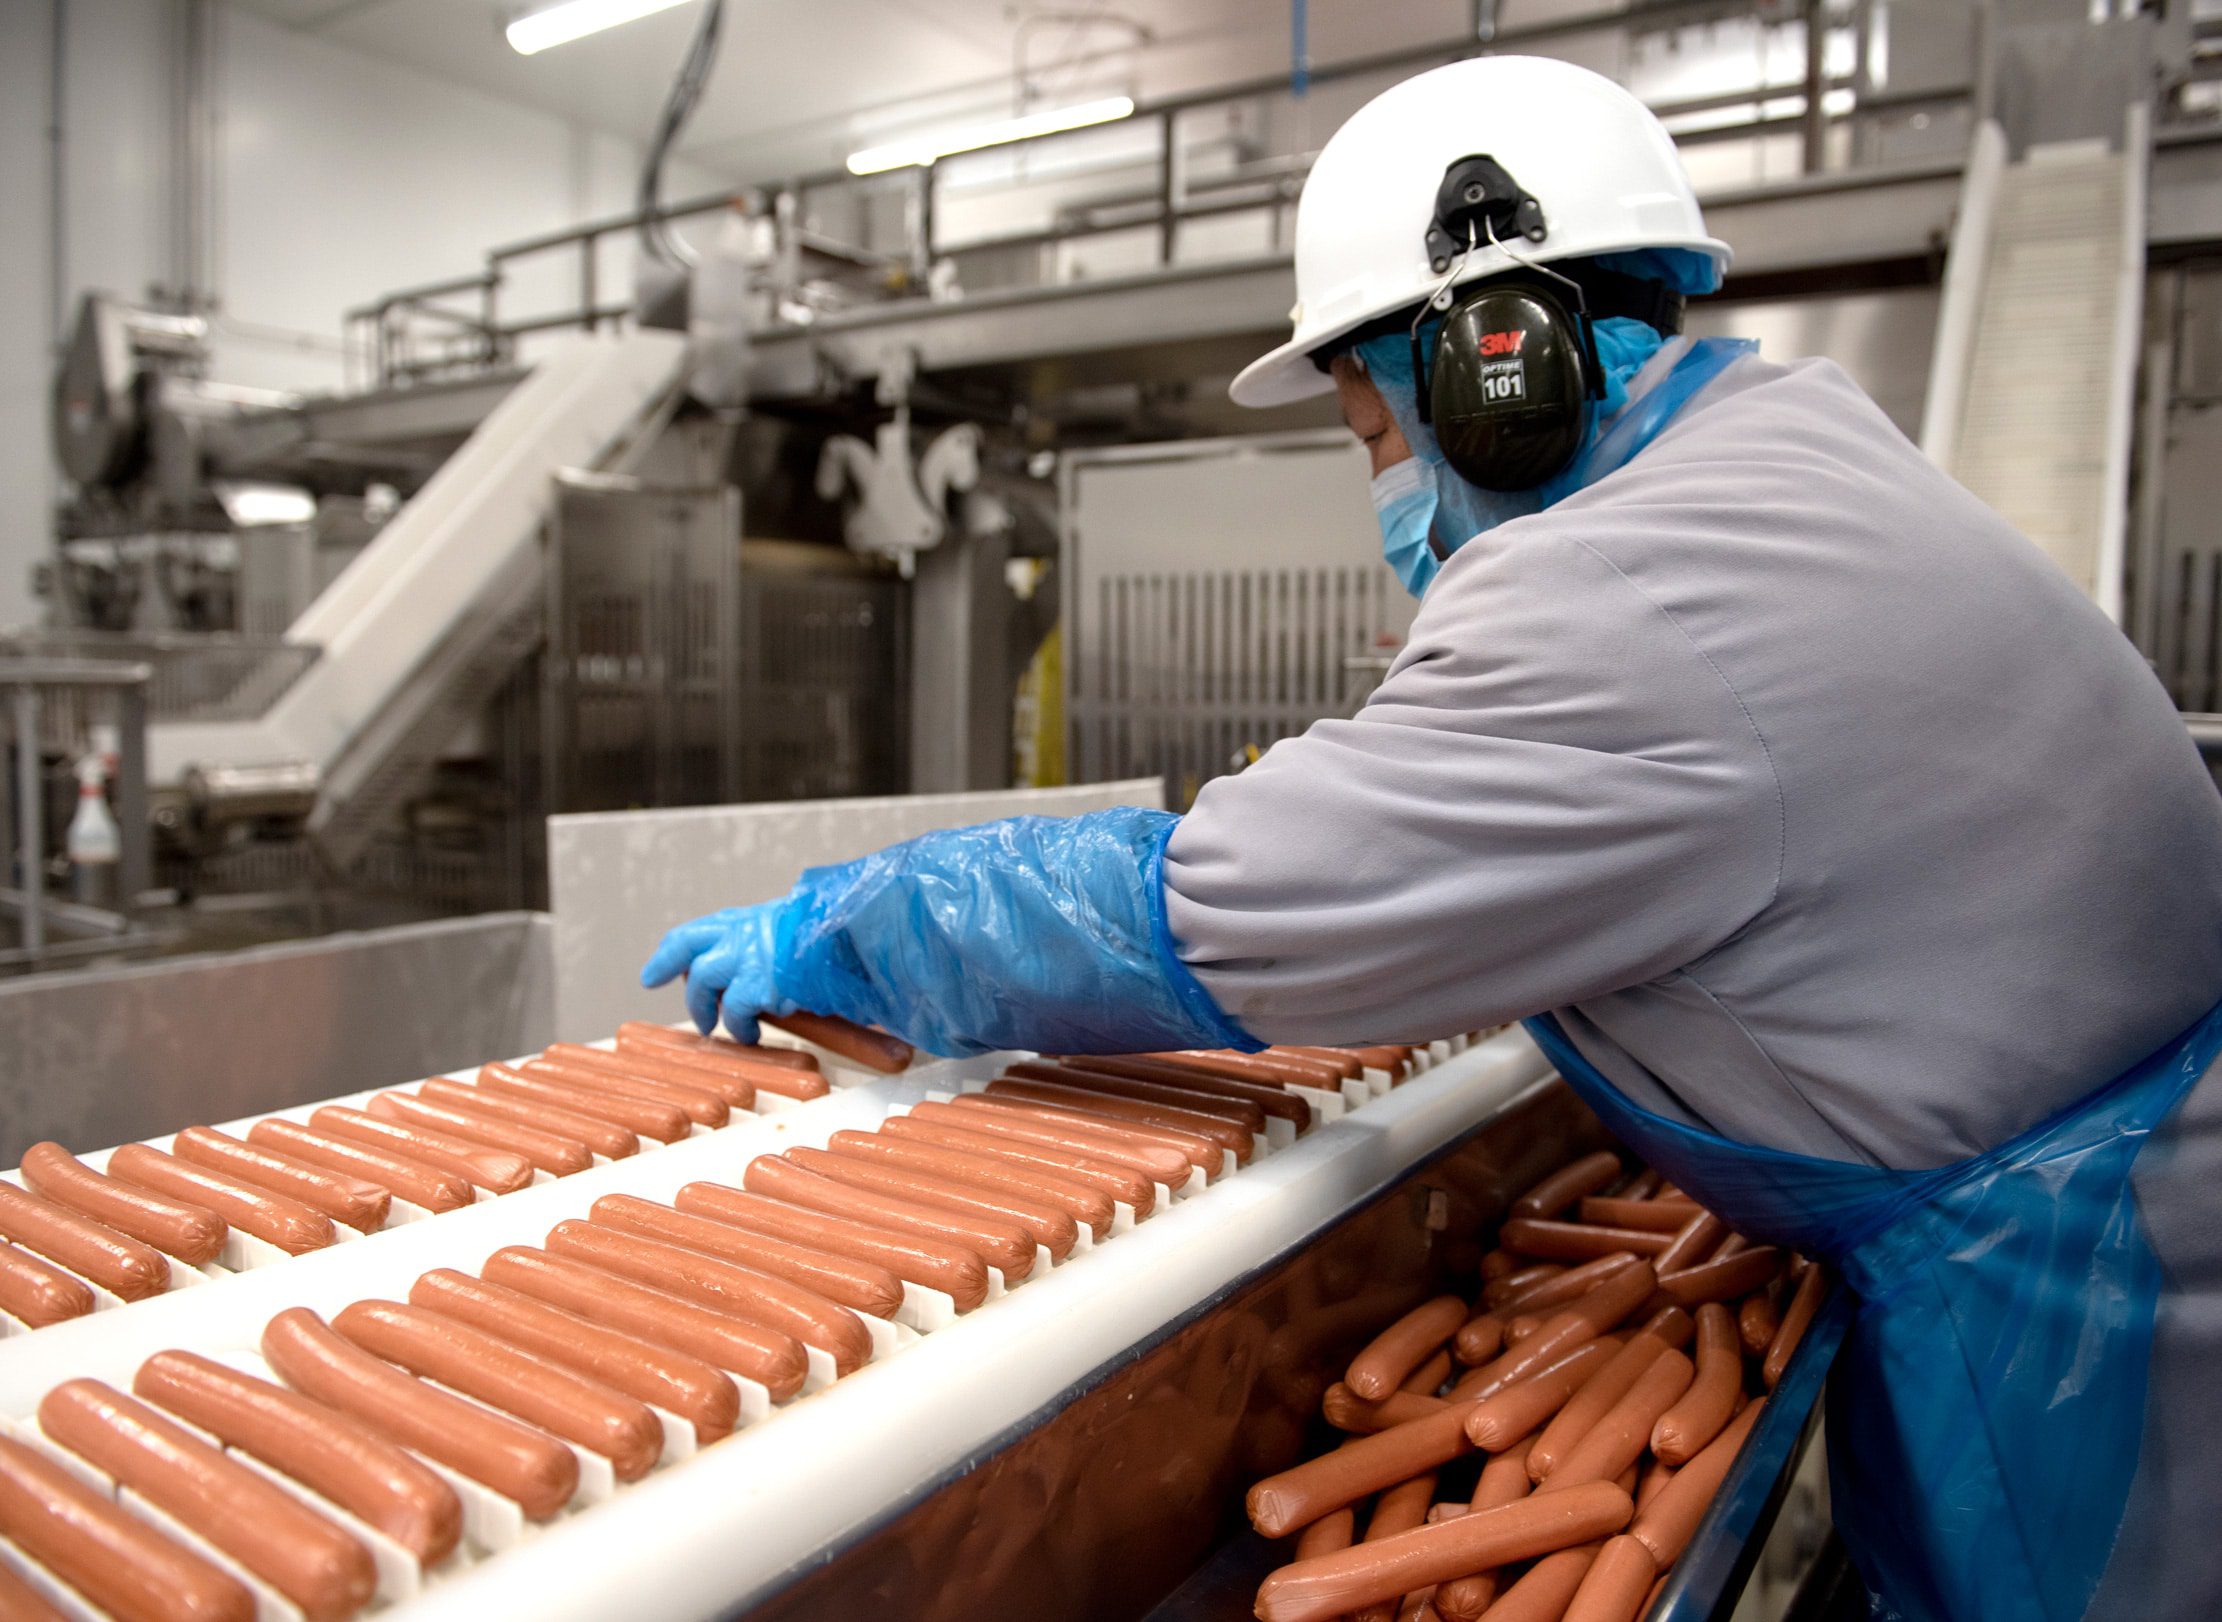 Employee working on wiener production line at Heritage plant.